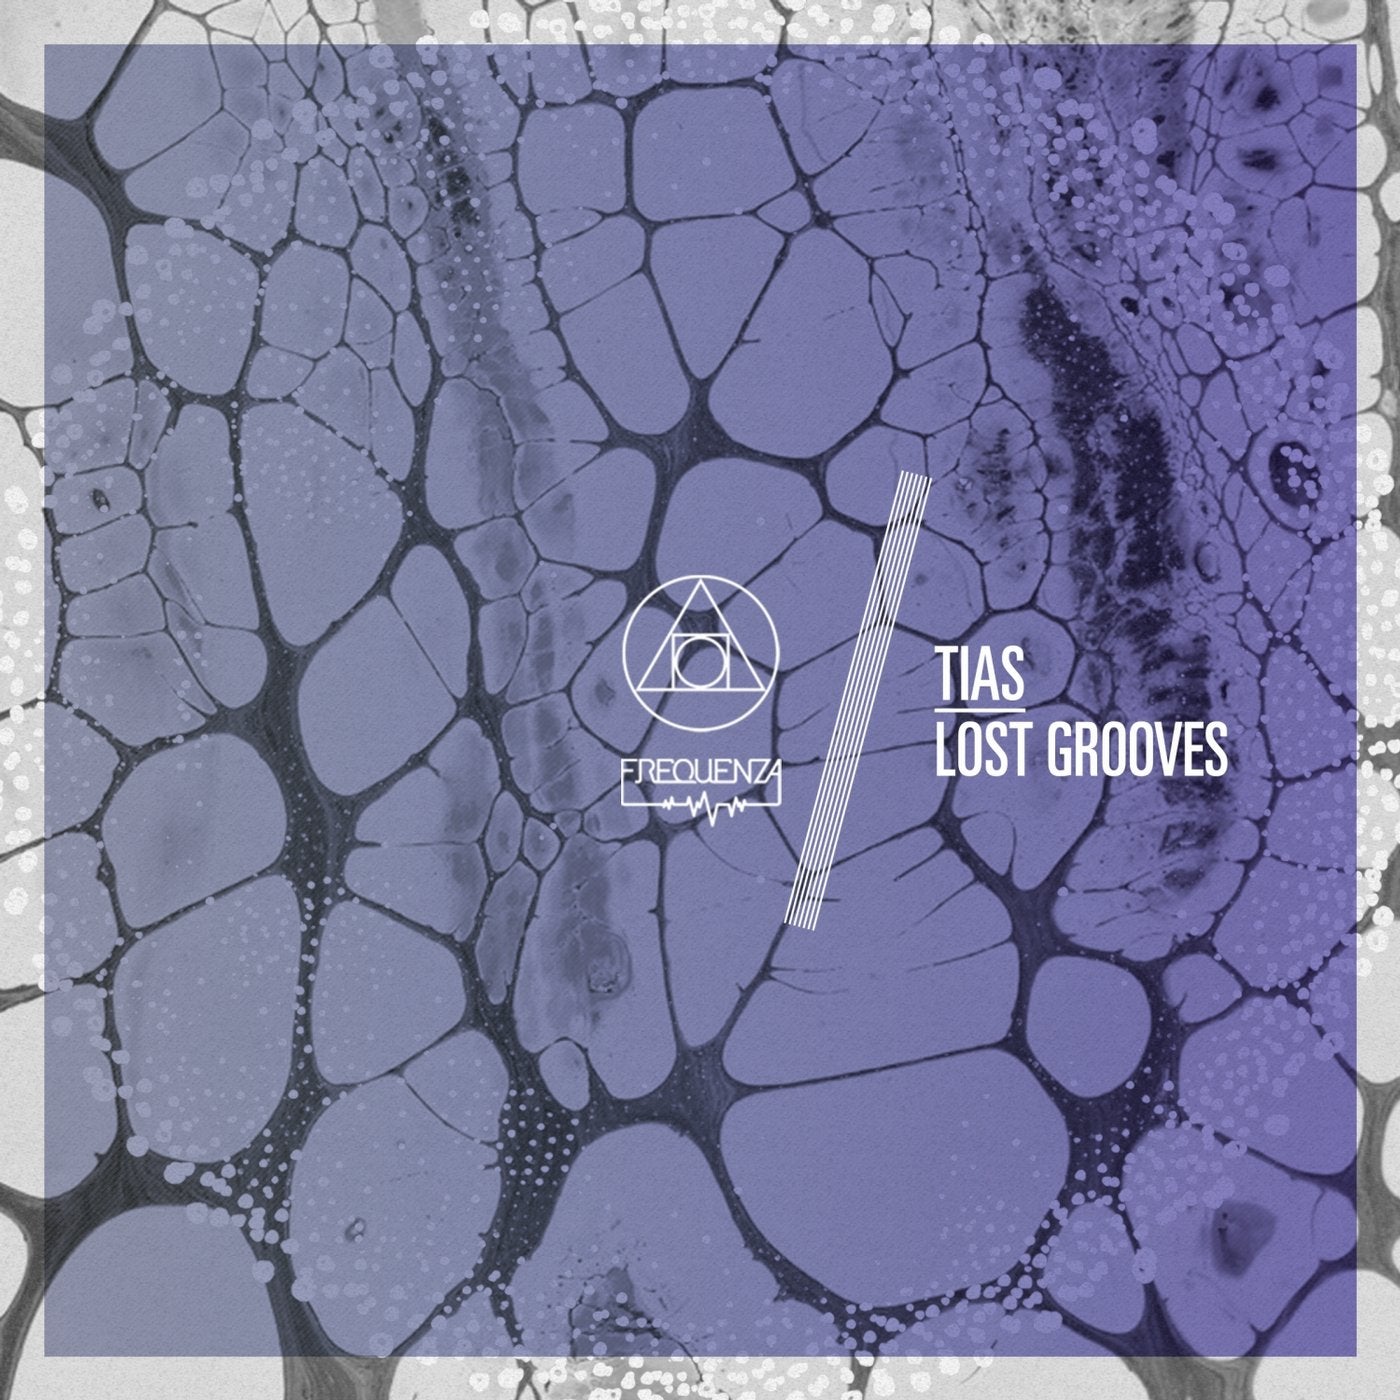 Lost Grooves